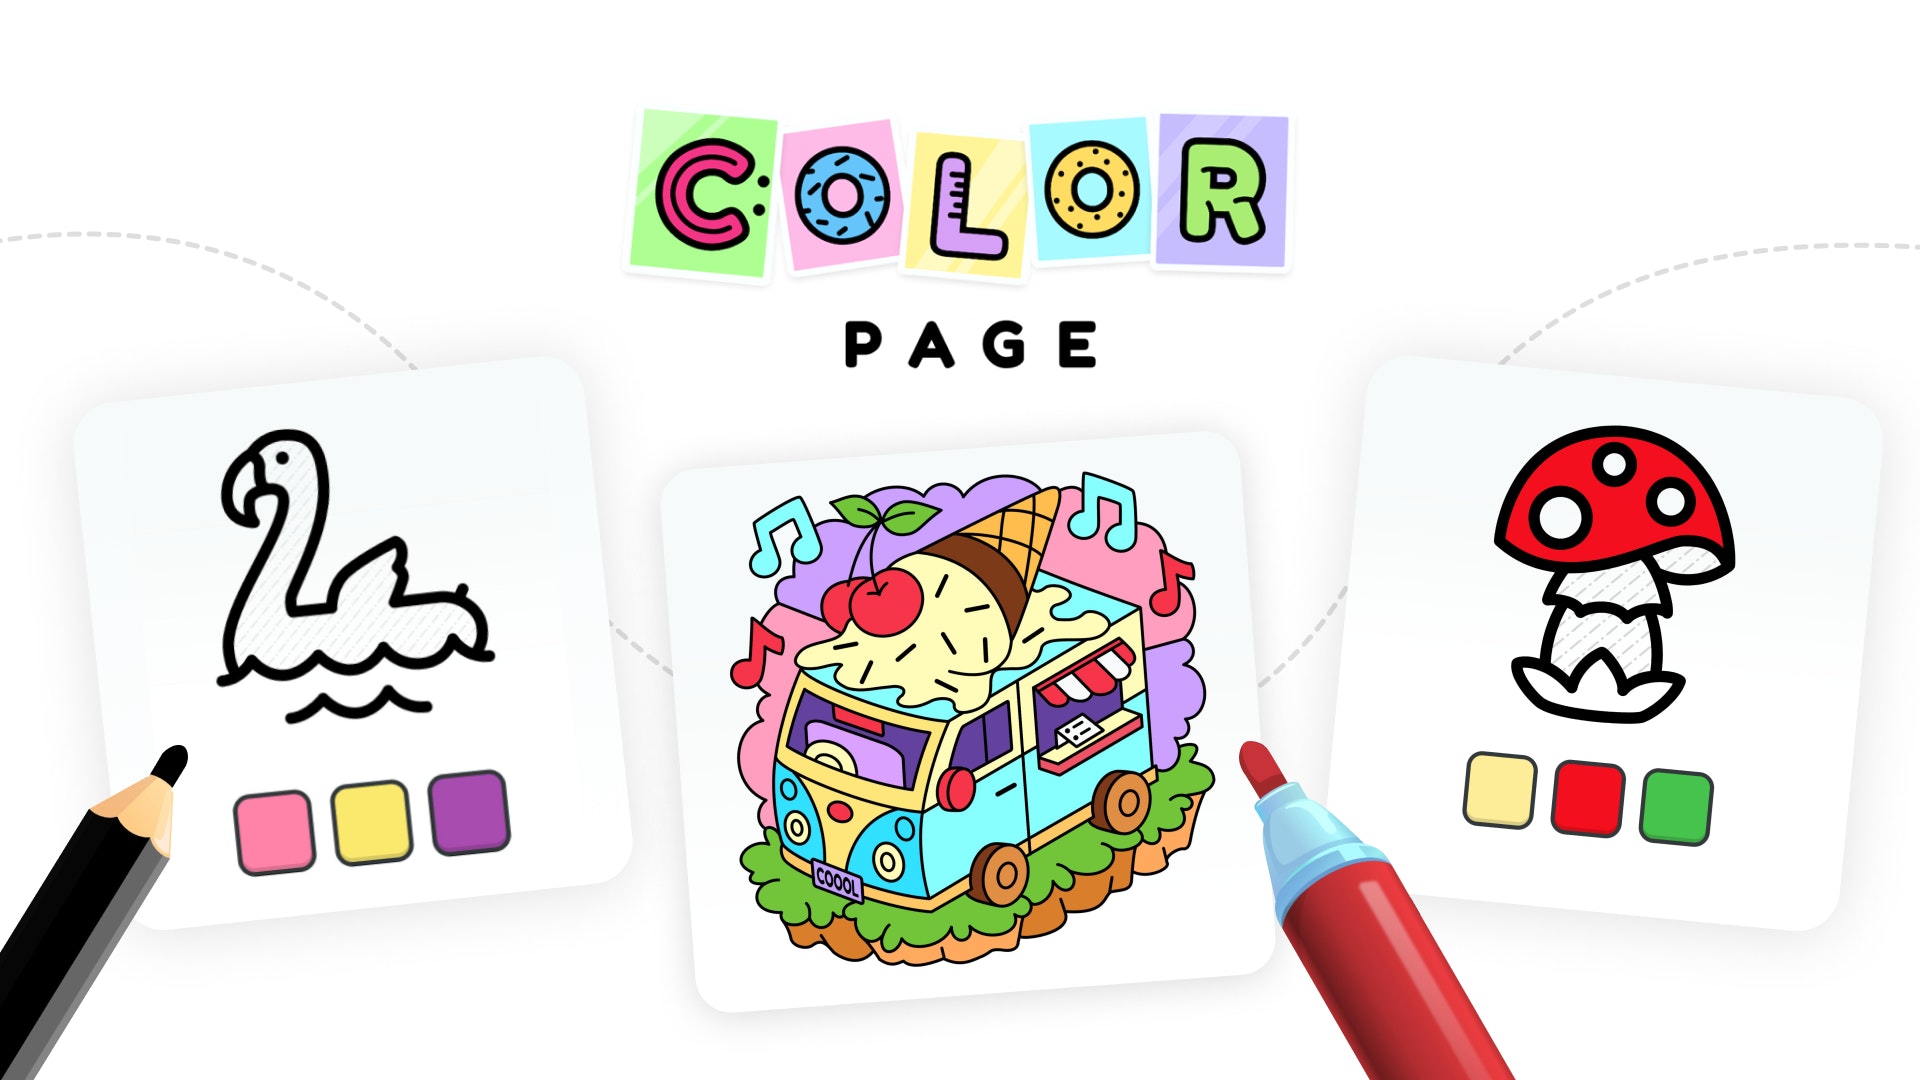 Chibi Doll Dress Up & Coloring 🕹️ Play on CrazyGames